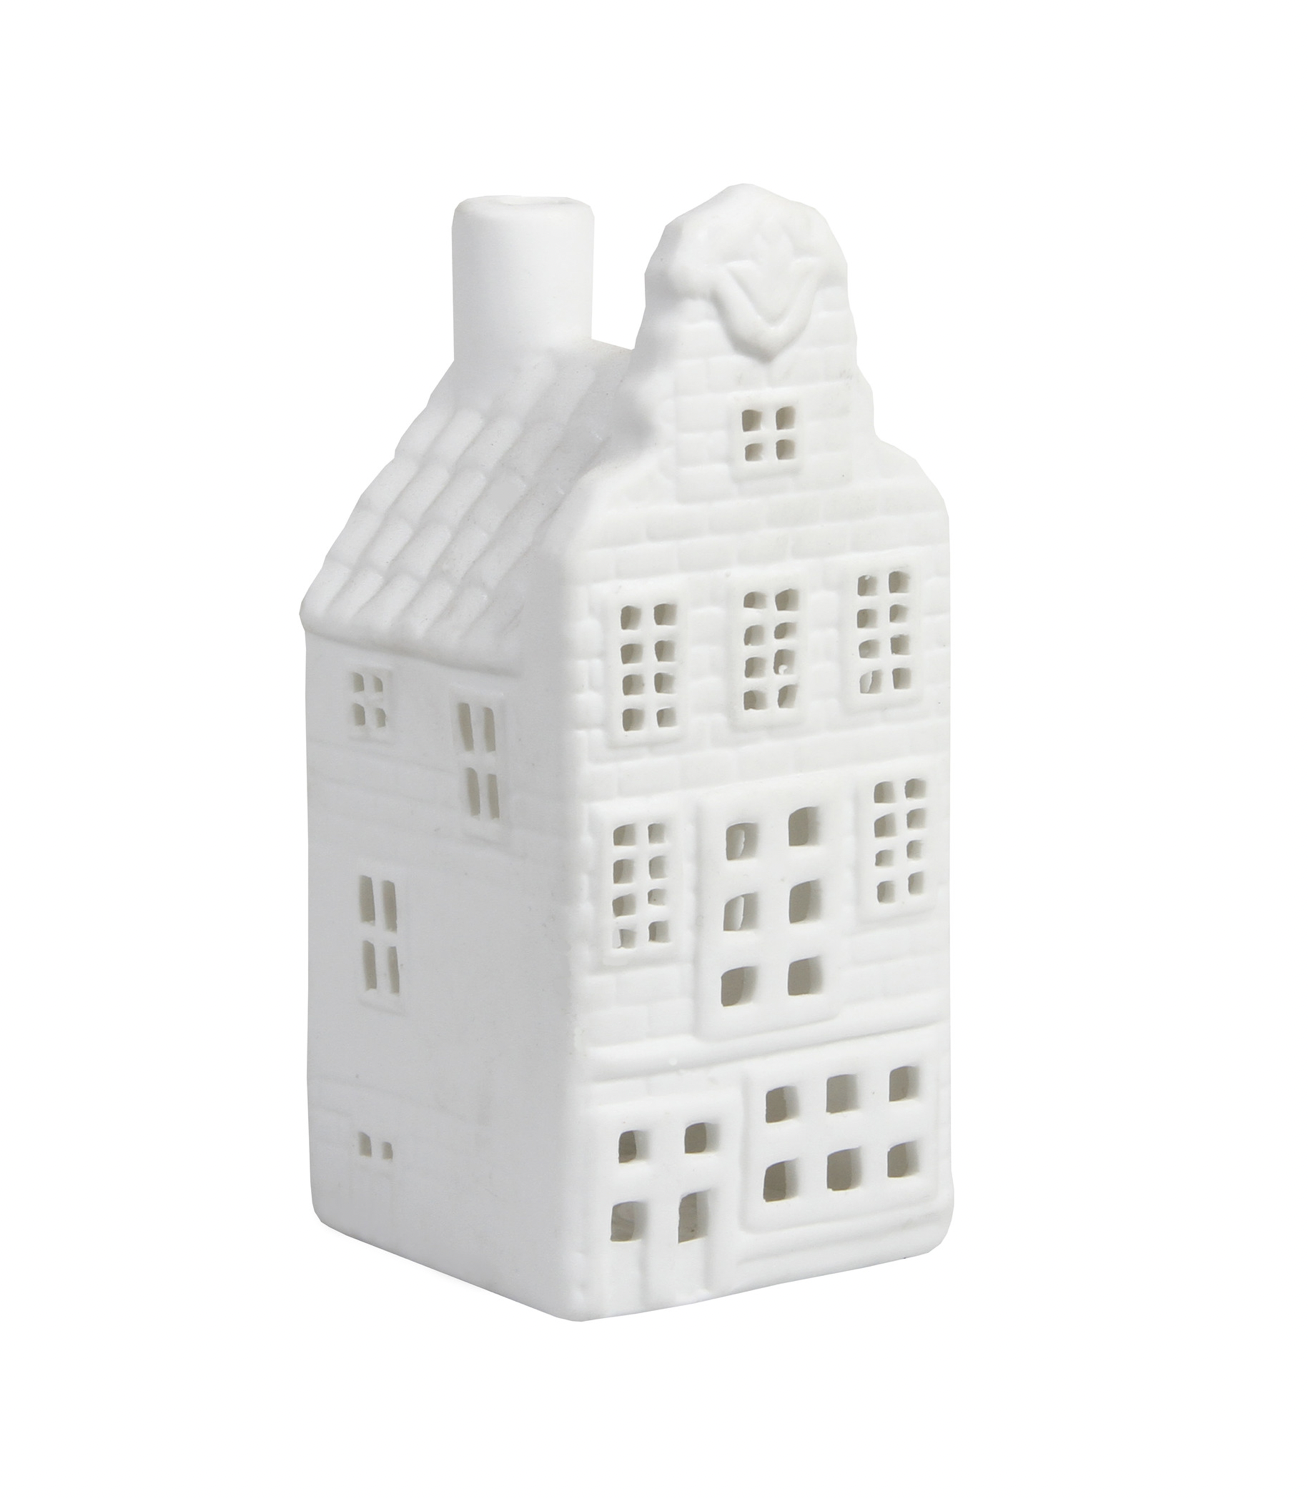 andklevering-tealight-holder-canal-house-tulip